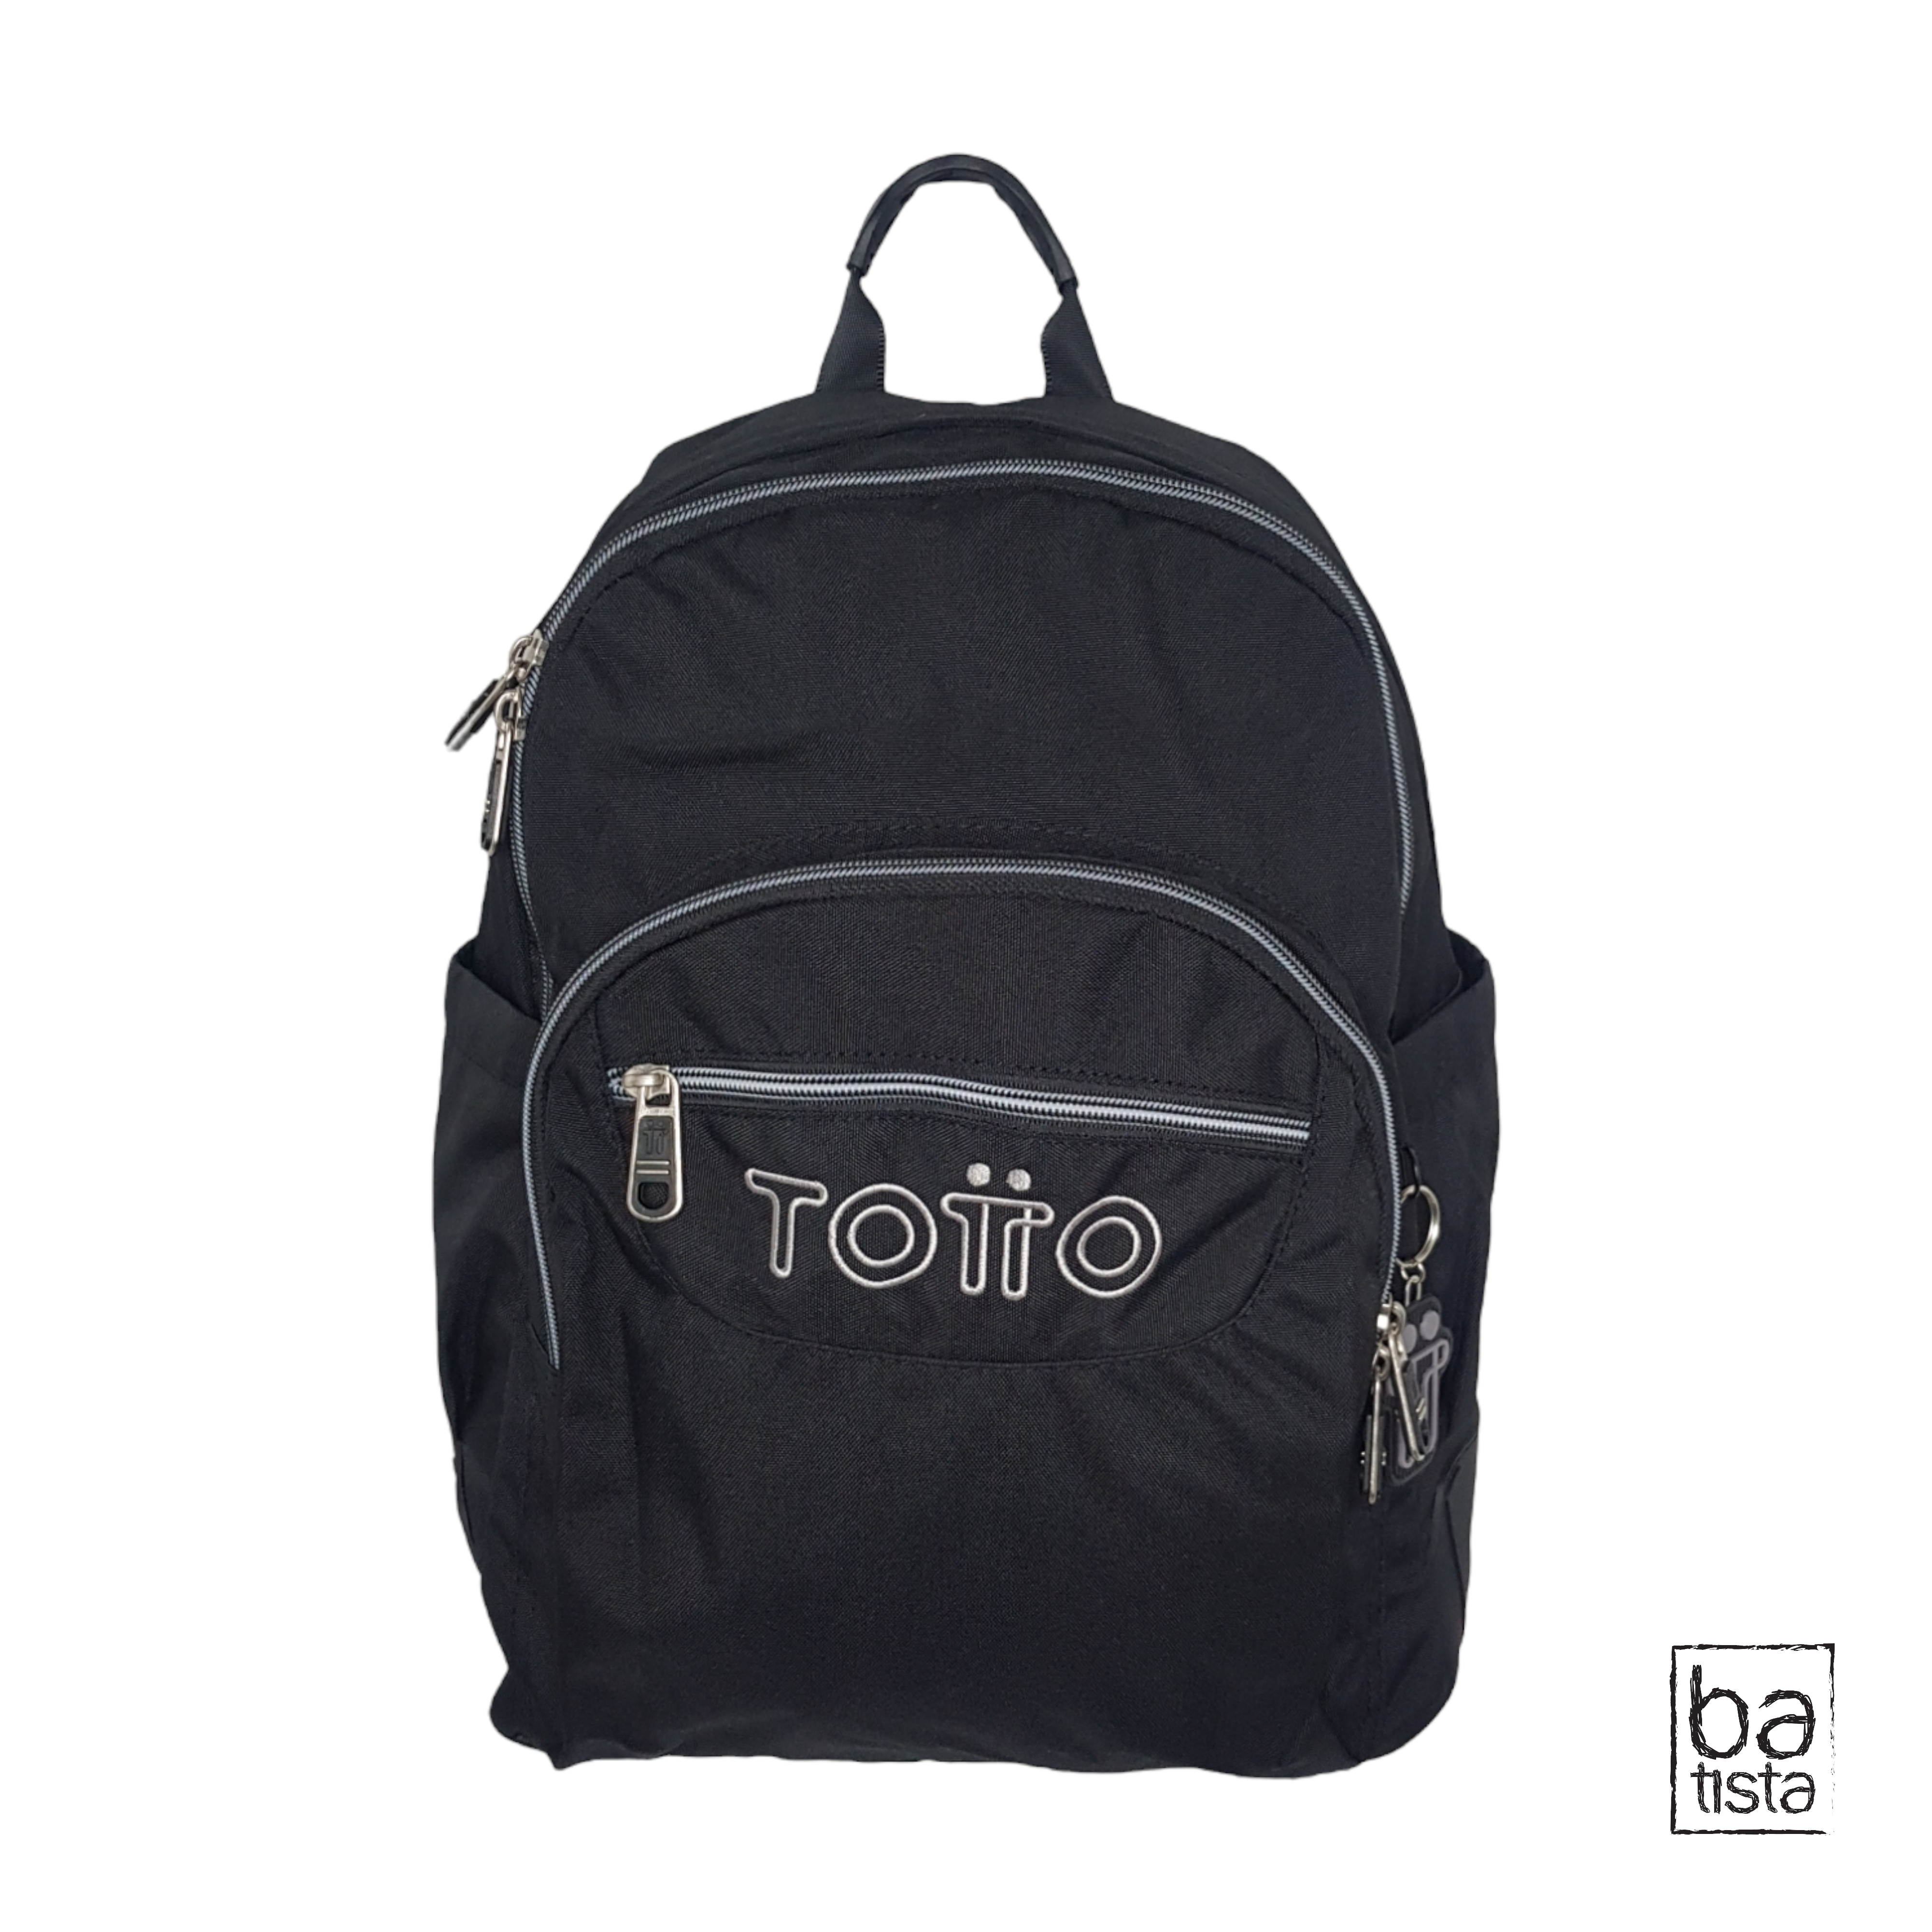 Morral Totto Rayol N01 19.6 Lts